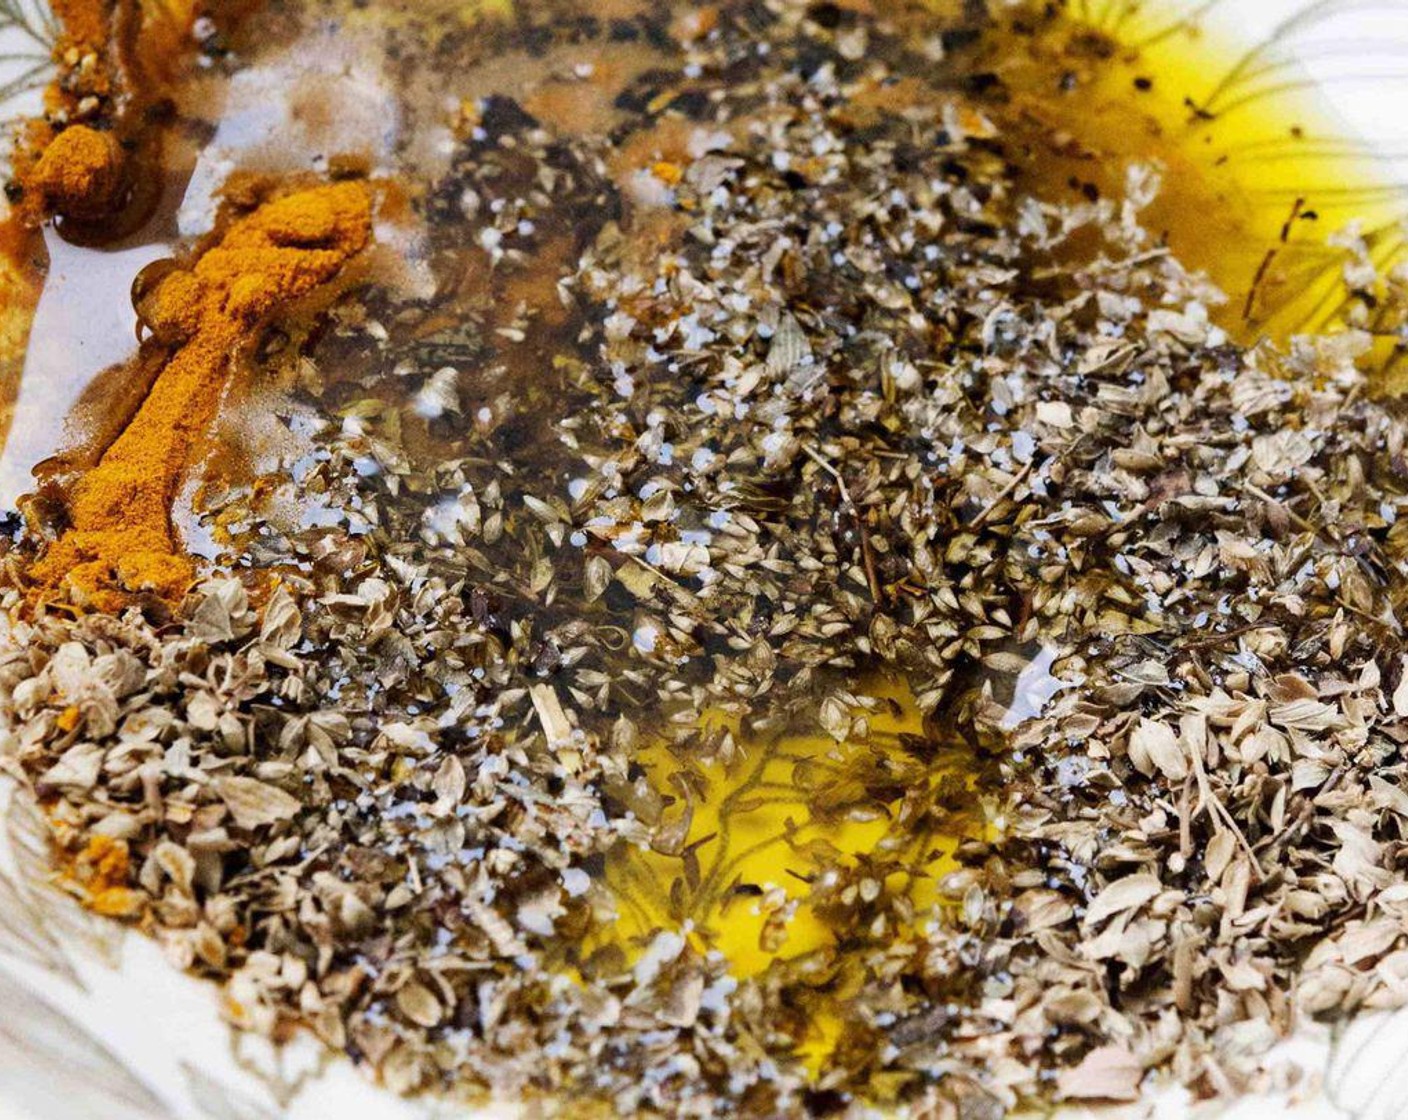 step 2 In a bowl, combine Extra-Virgin Olive Oil (1/3 cup), Dried Oregano (2 Tbsp), Ground Turmeric (1 Tbsp), Salt (to taste), and Ground Black Pepper (to taste). Stir until ingredients are all well mixed.